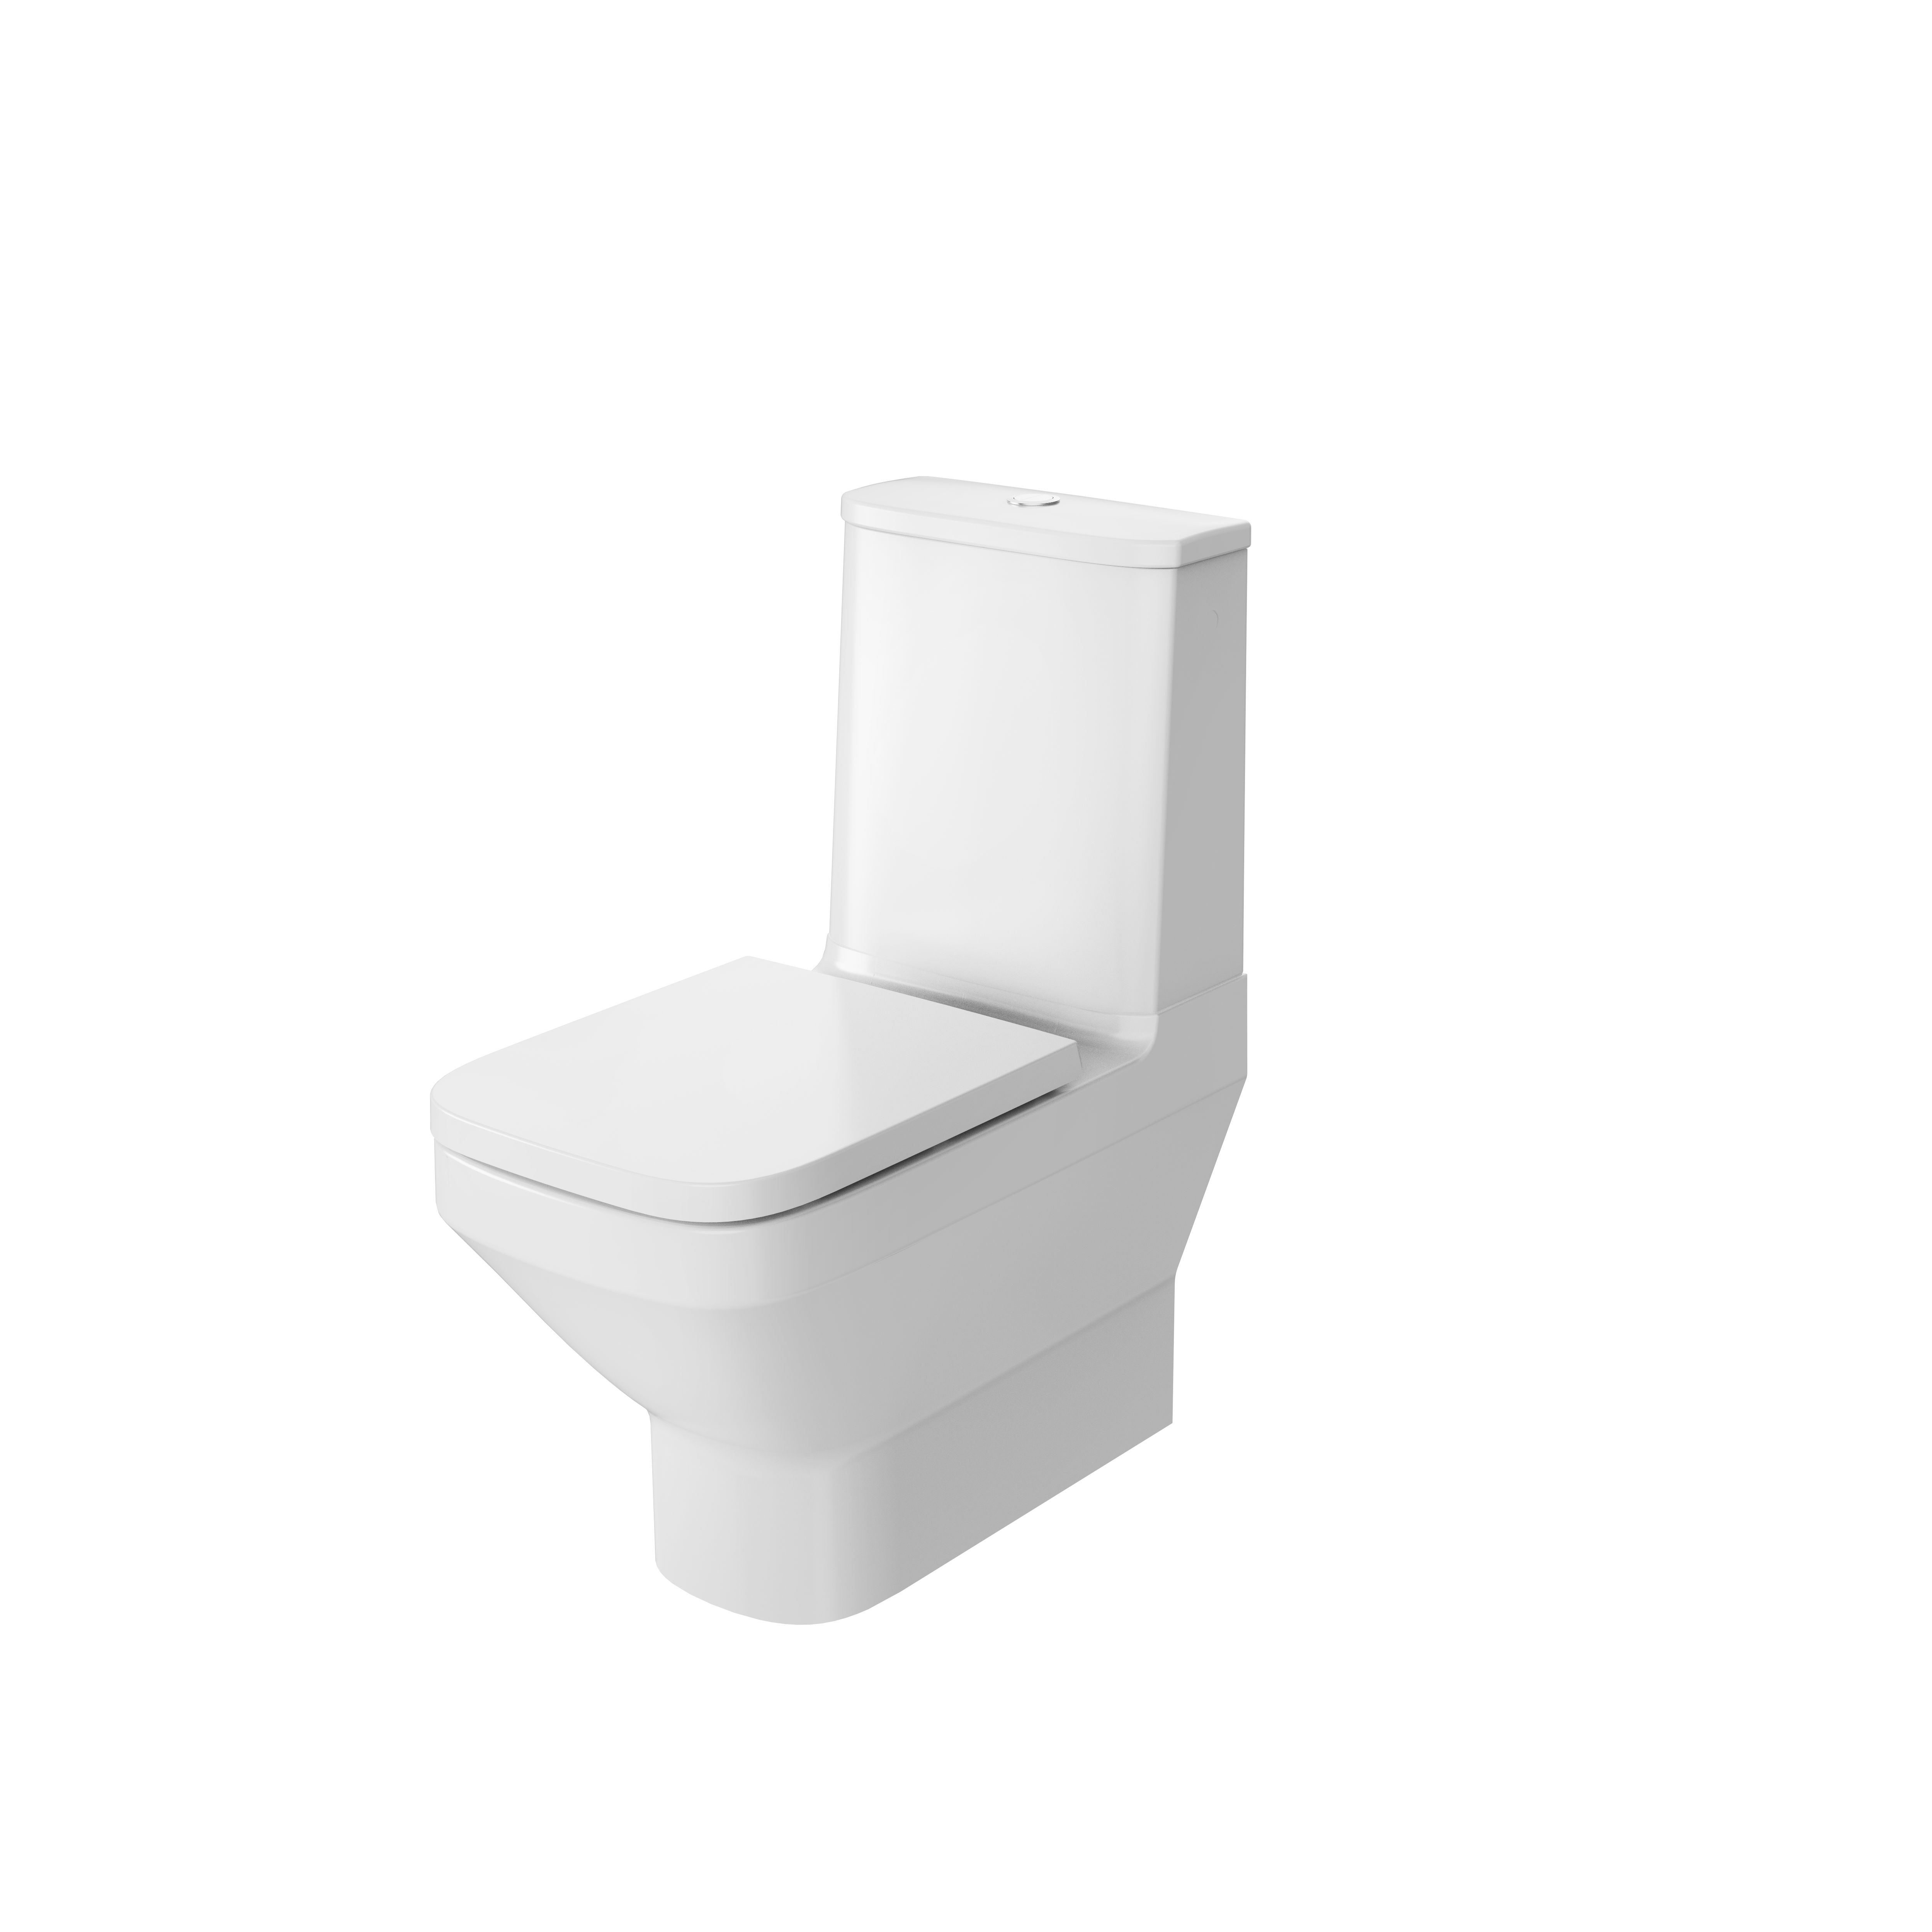 GoodHome Teesta White Standard Back to wall close-coupled Square Toilet set with Soft close seat